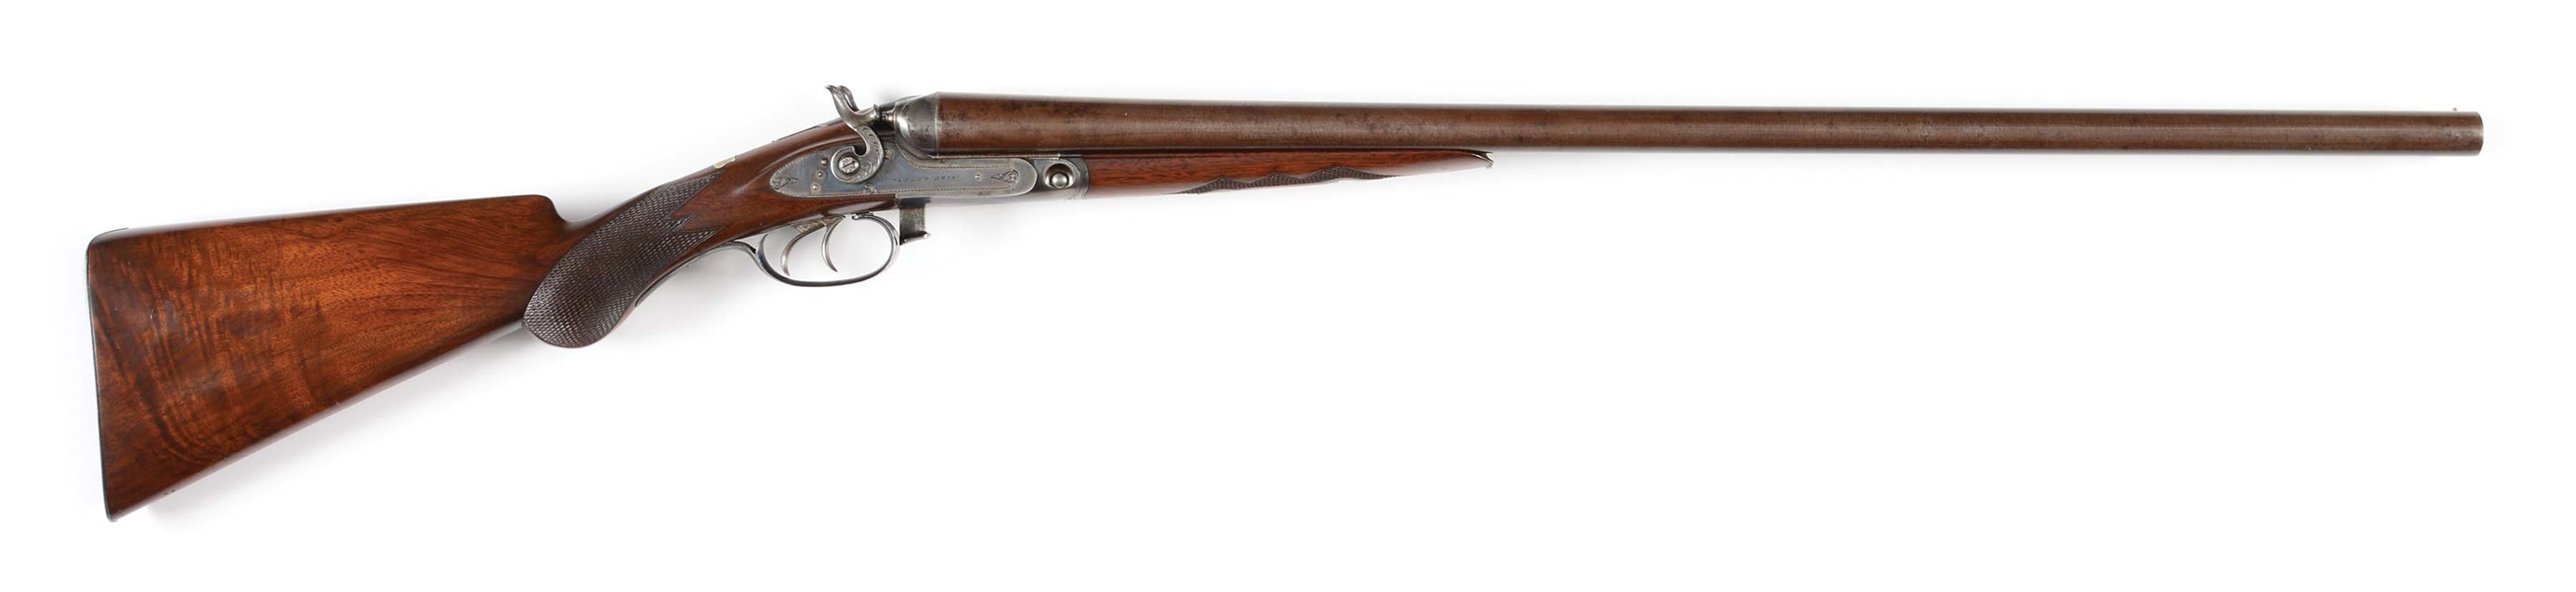 (A) SCARCE EARLY SPECIAL ORDER PARKER BROTHERS GRADE 1 LIFTER HAMMER SHOTGUN IN 10 GAUGE.